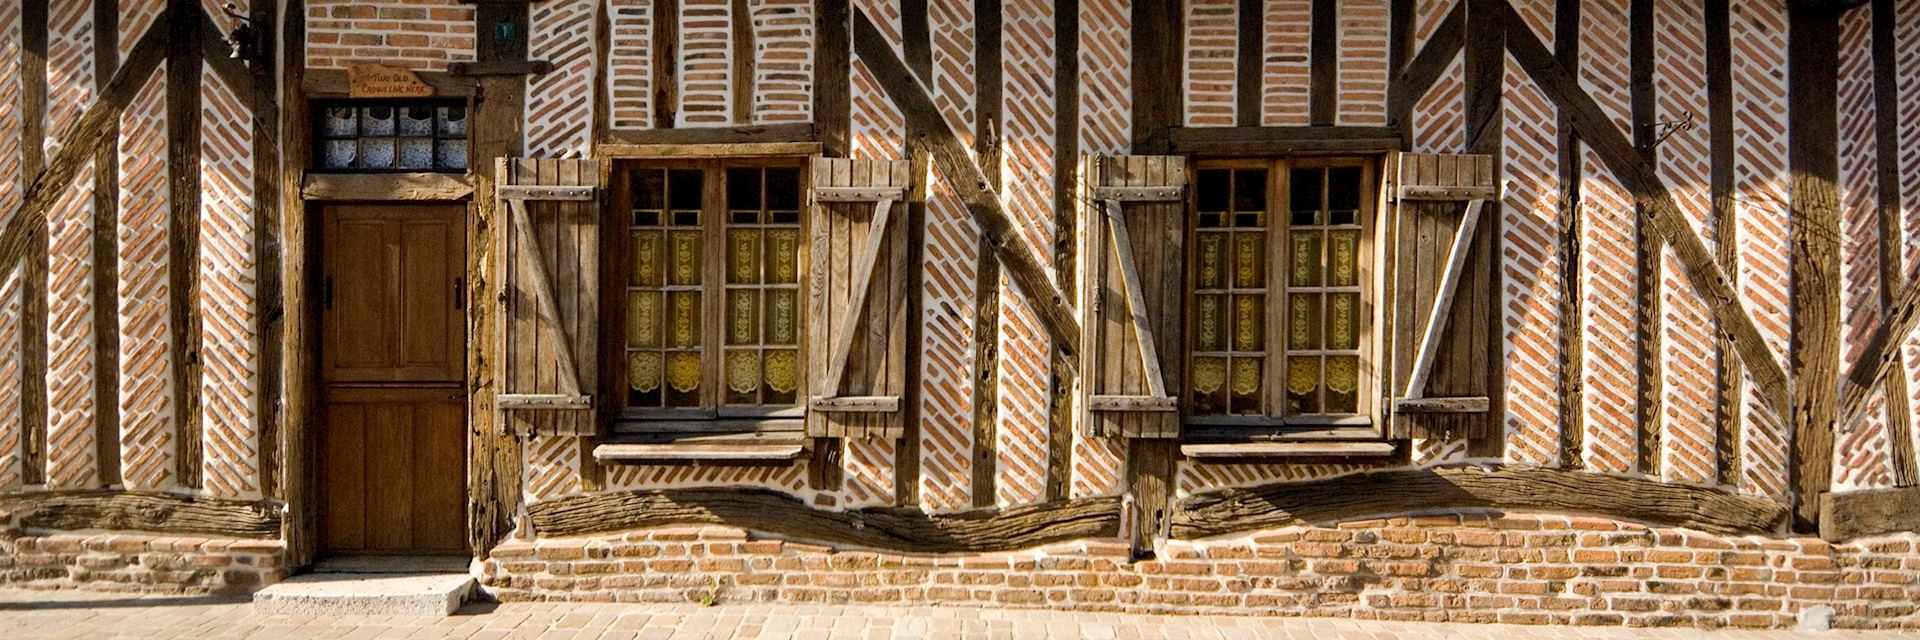 Normandy house, France